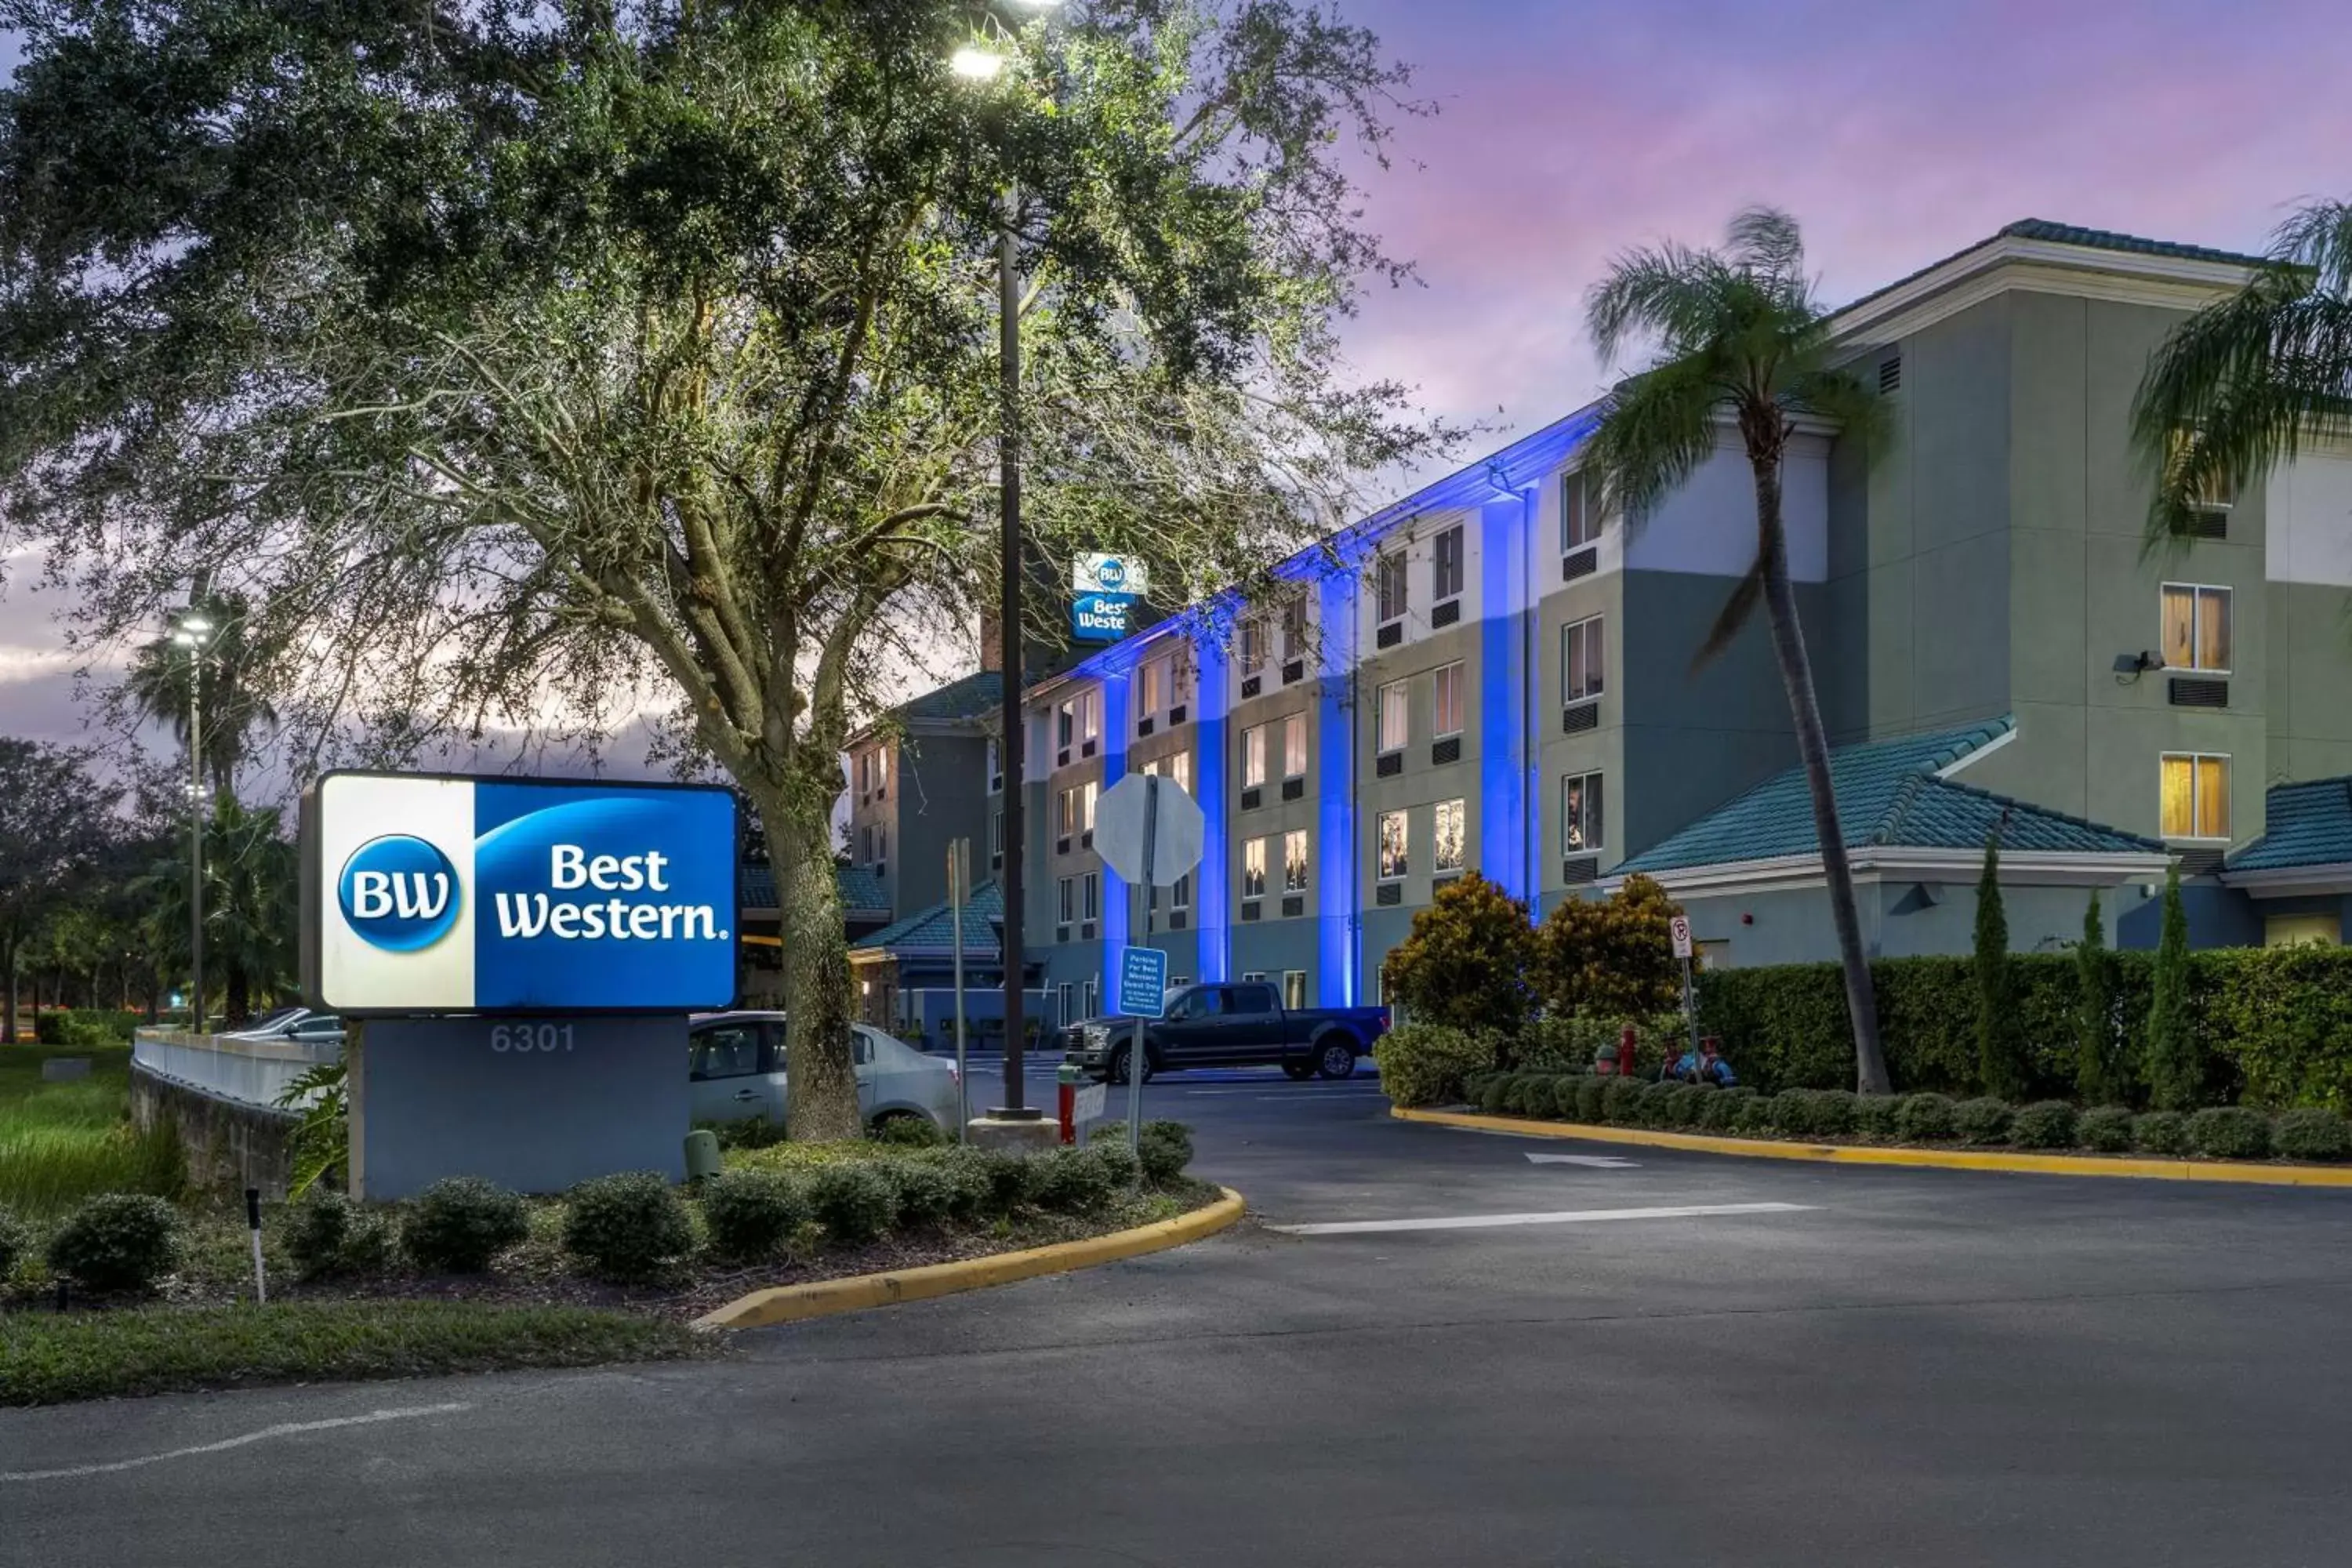 Property Building in Best Western Orlando Theme Parks